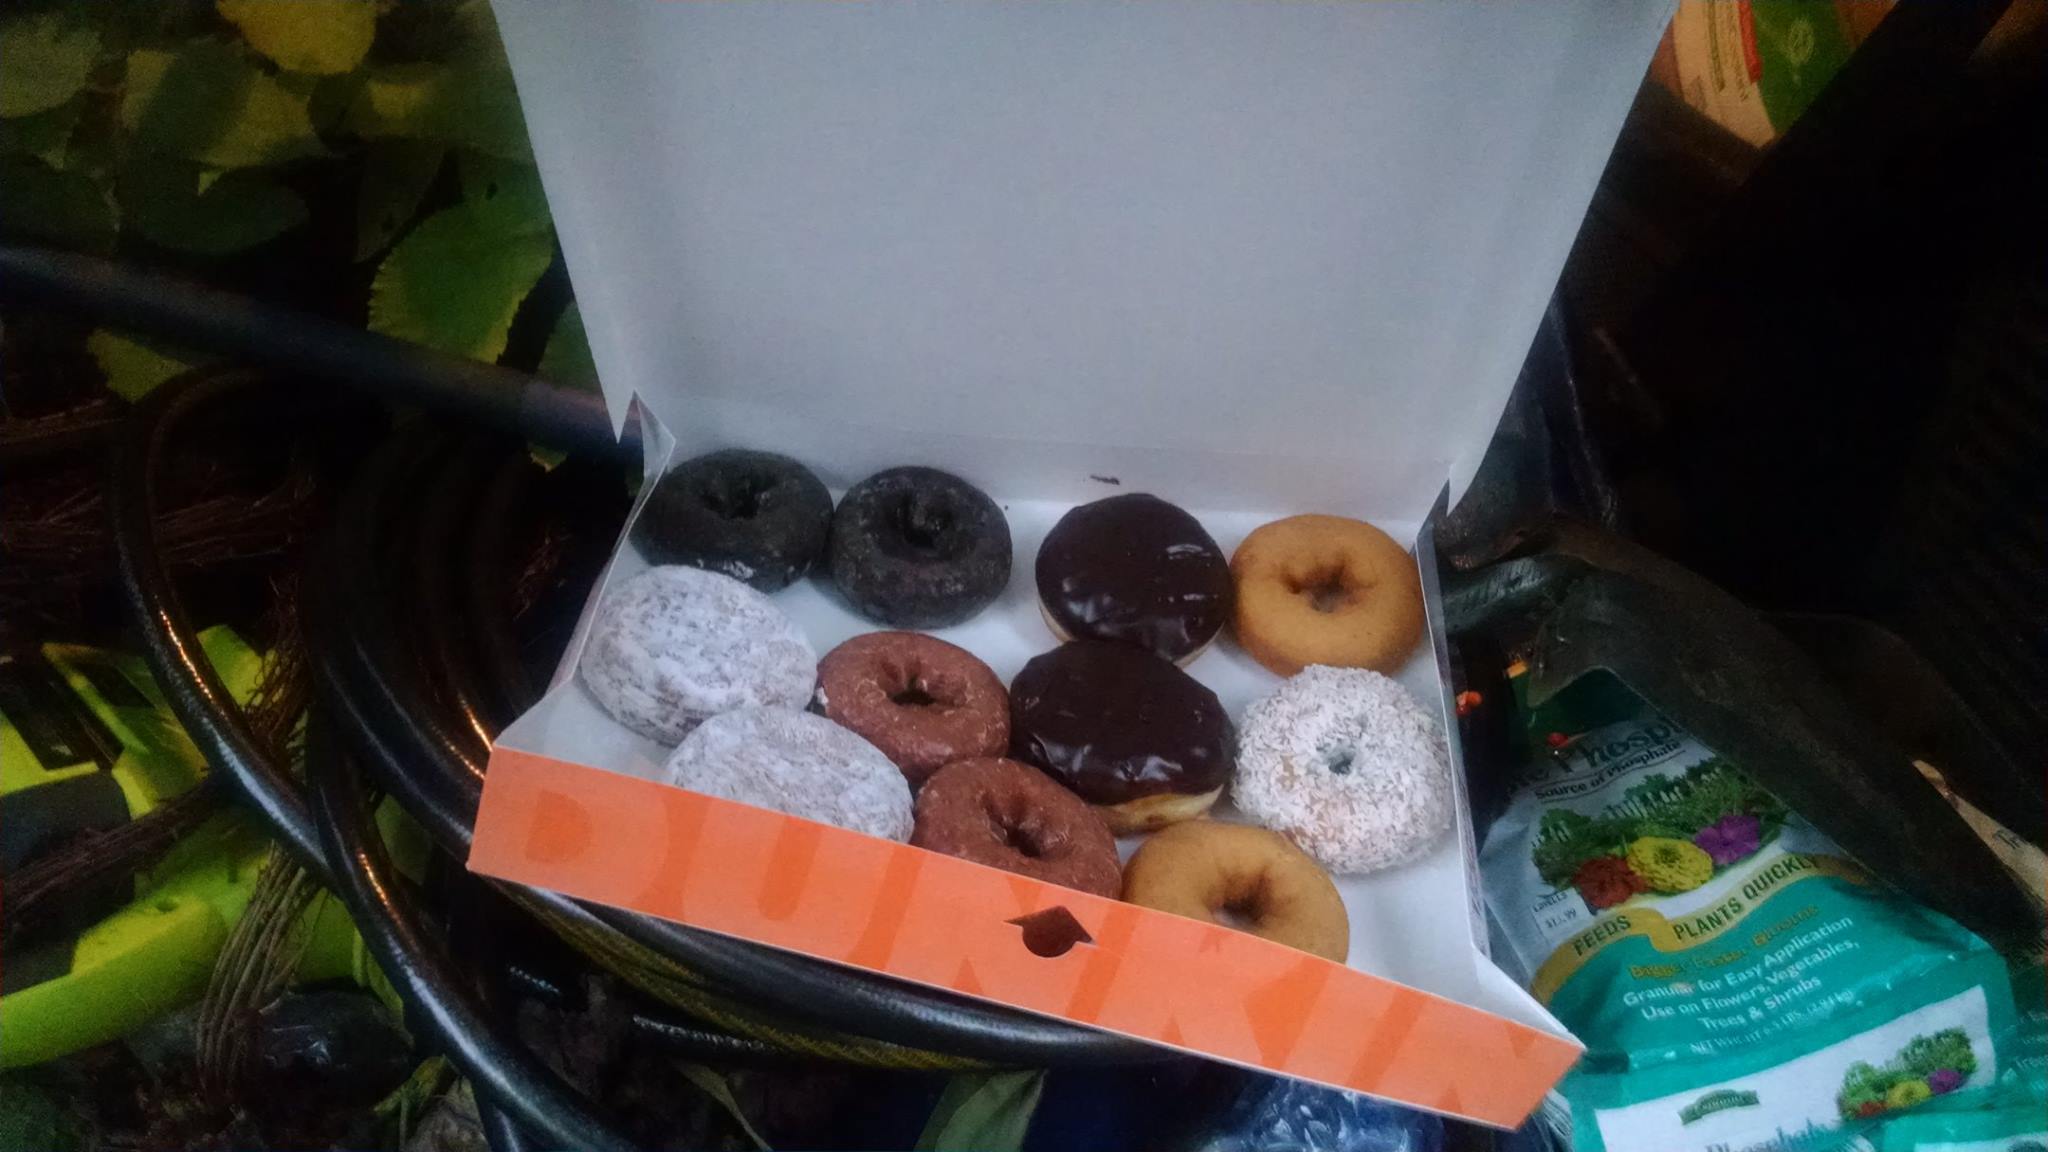 donuts for the garden crew